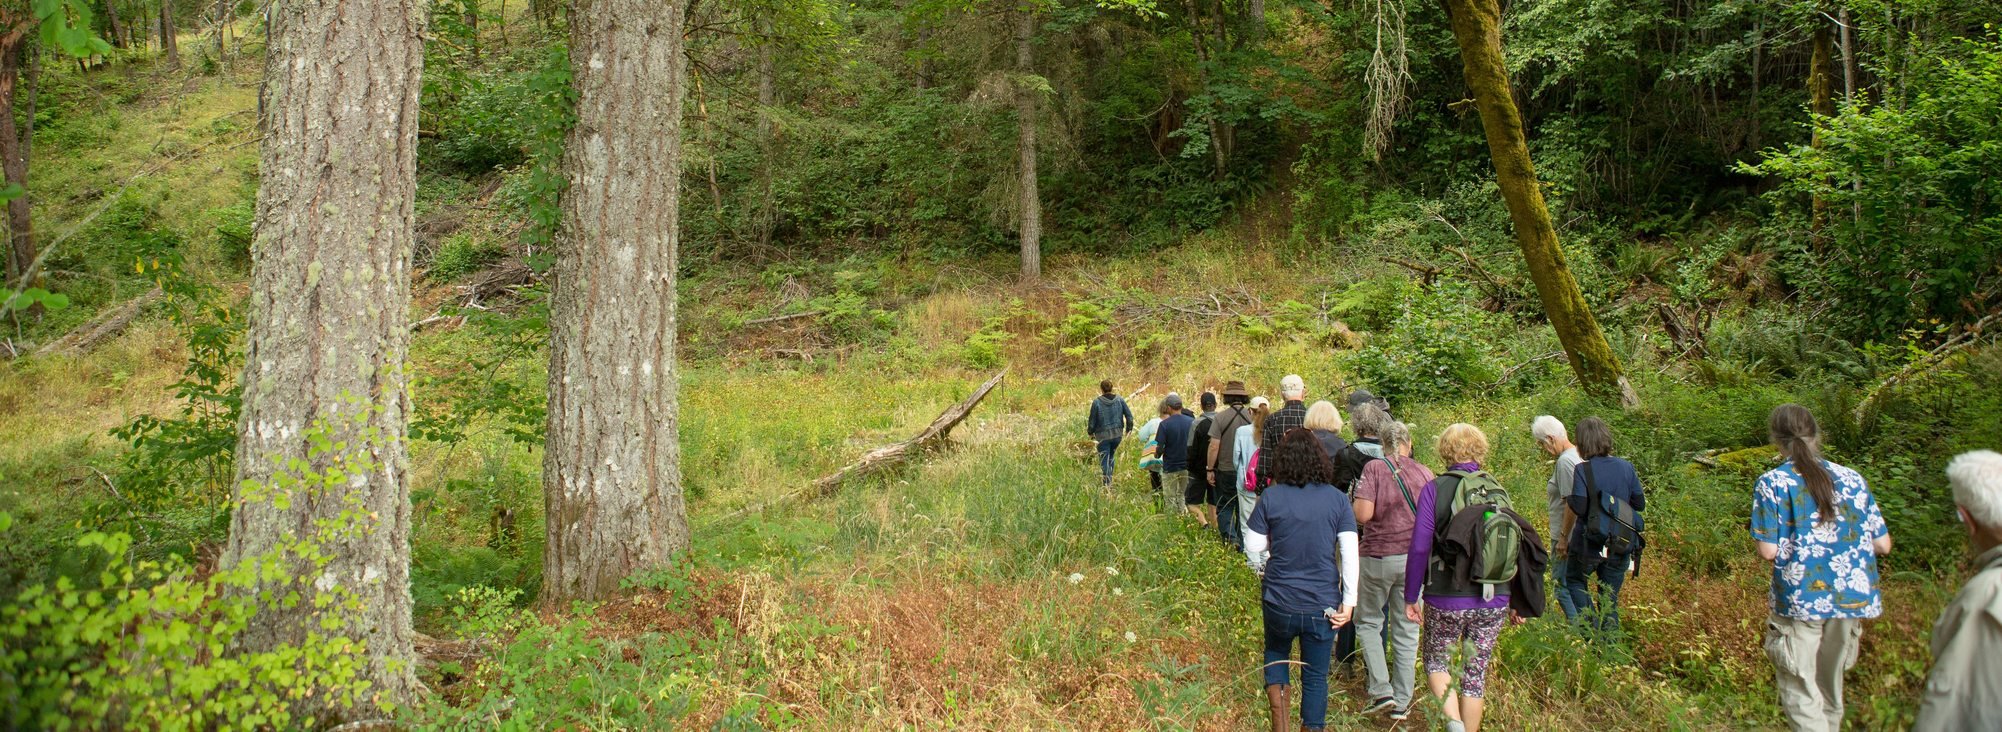 Group of people being led on a tour through Chehalem Ridge Nature Park. The group is shown from behind, walking on a trail through the woods.